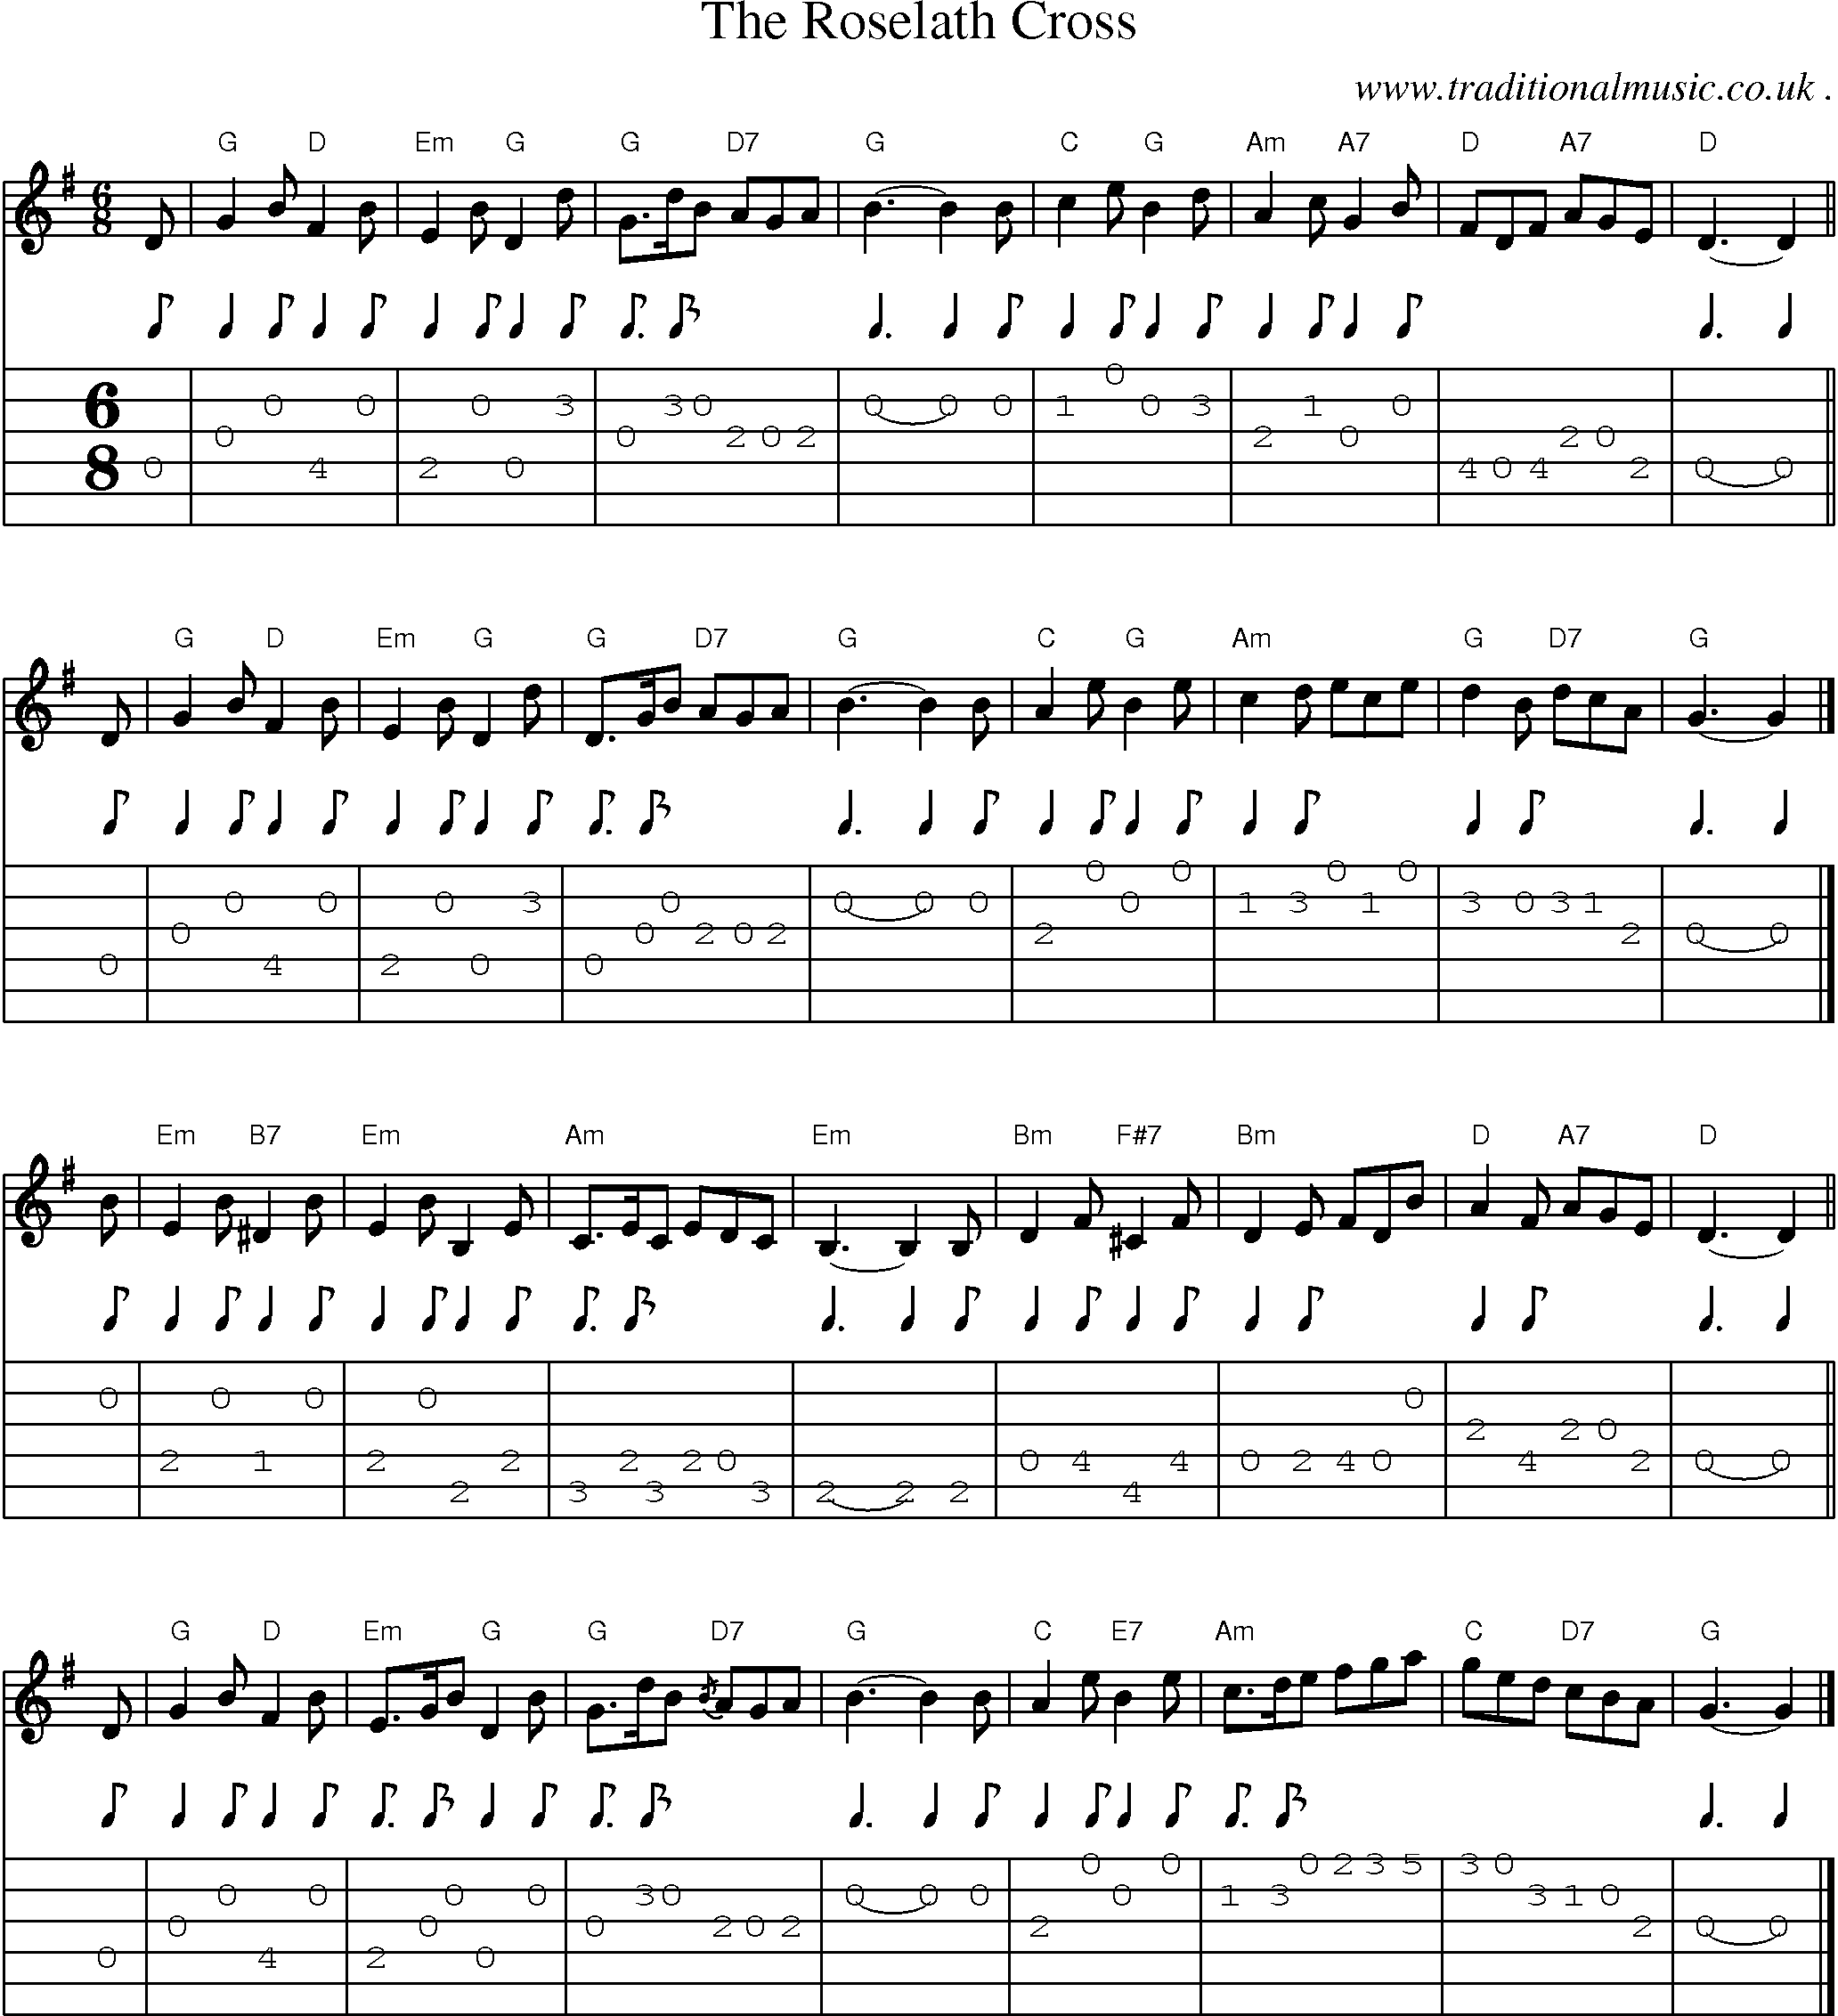 Sheet-music  score, Chords and Guitar Tabs for The Roselath Cross